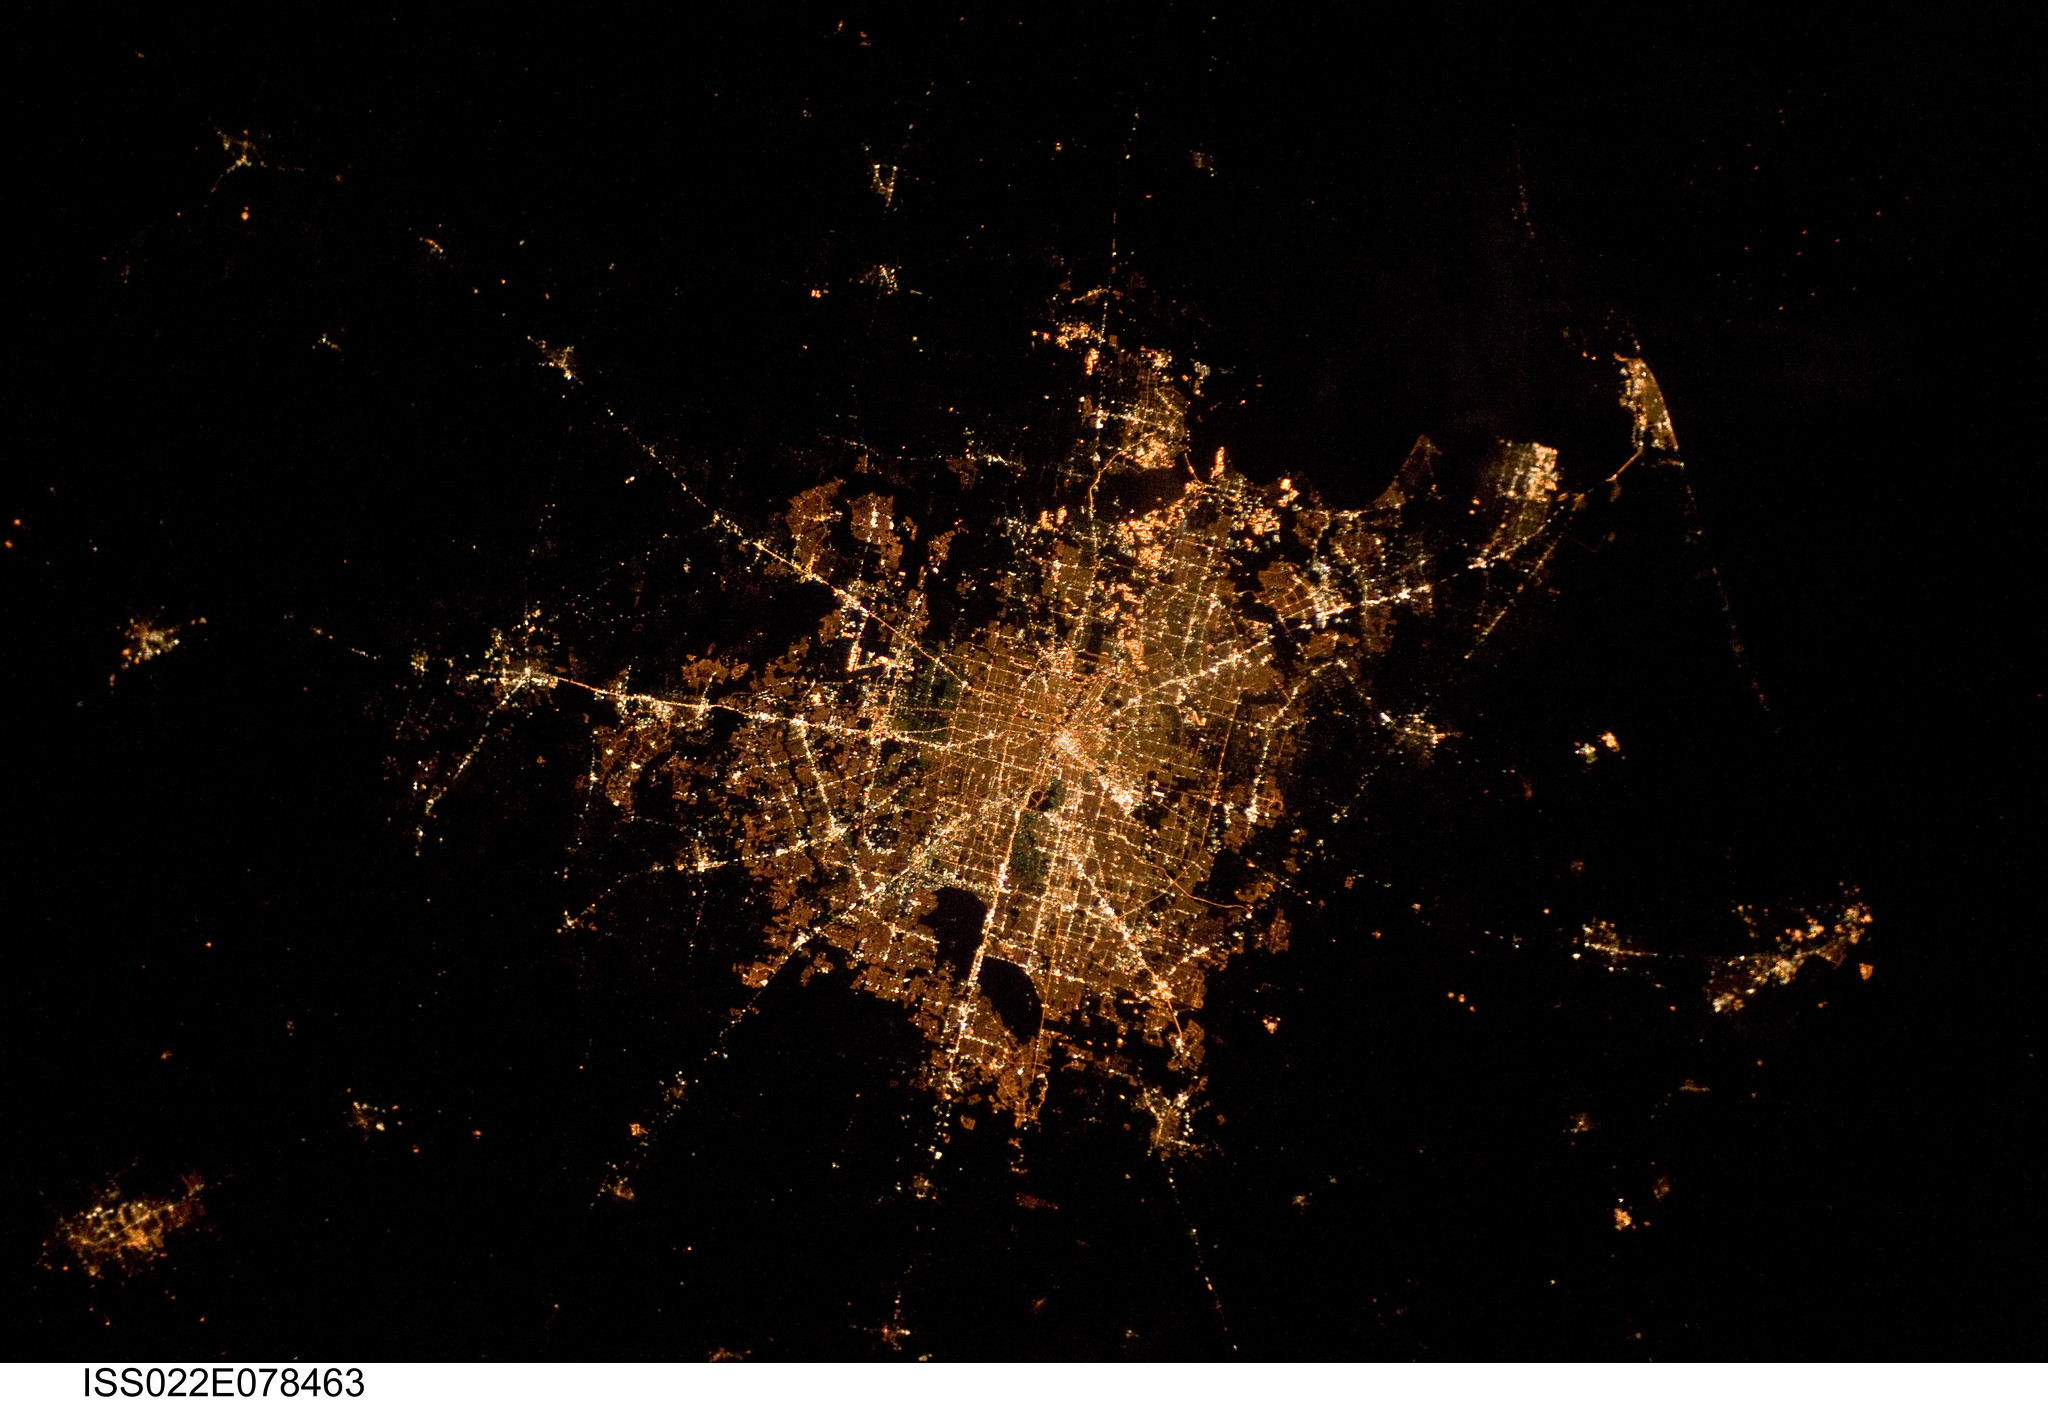 Houston as seen from the International Space Station